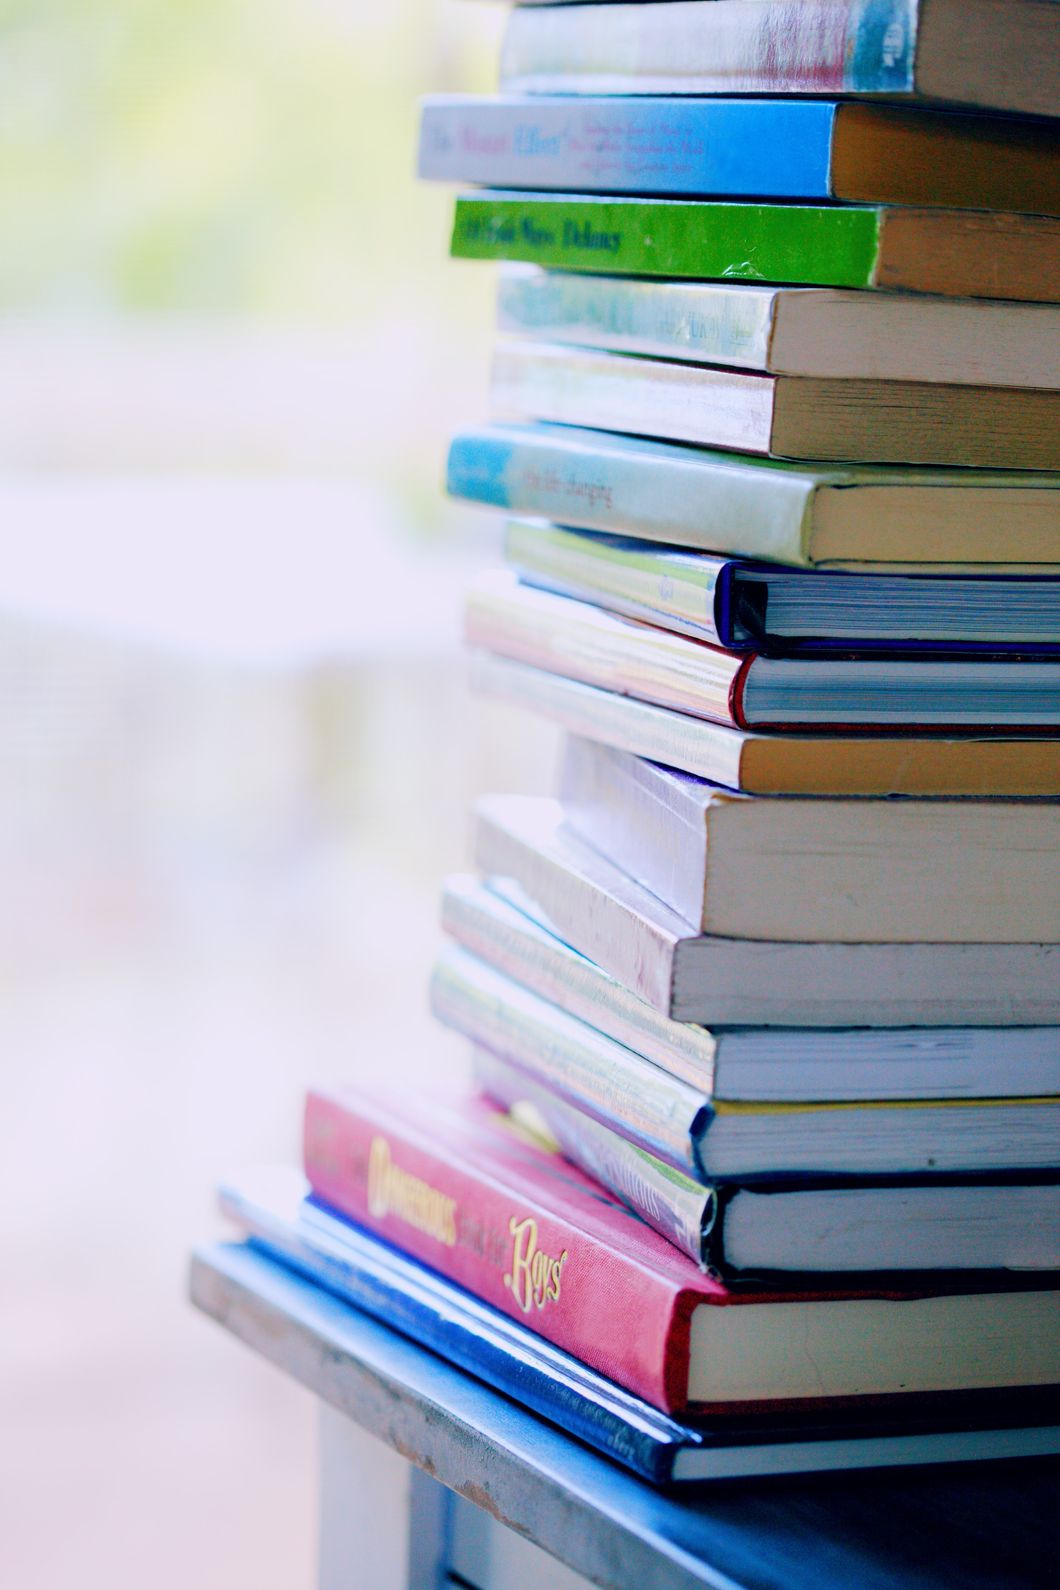 https://www.pexels.com/photo/background-book-stack-books-close-up-1148399/